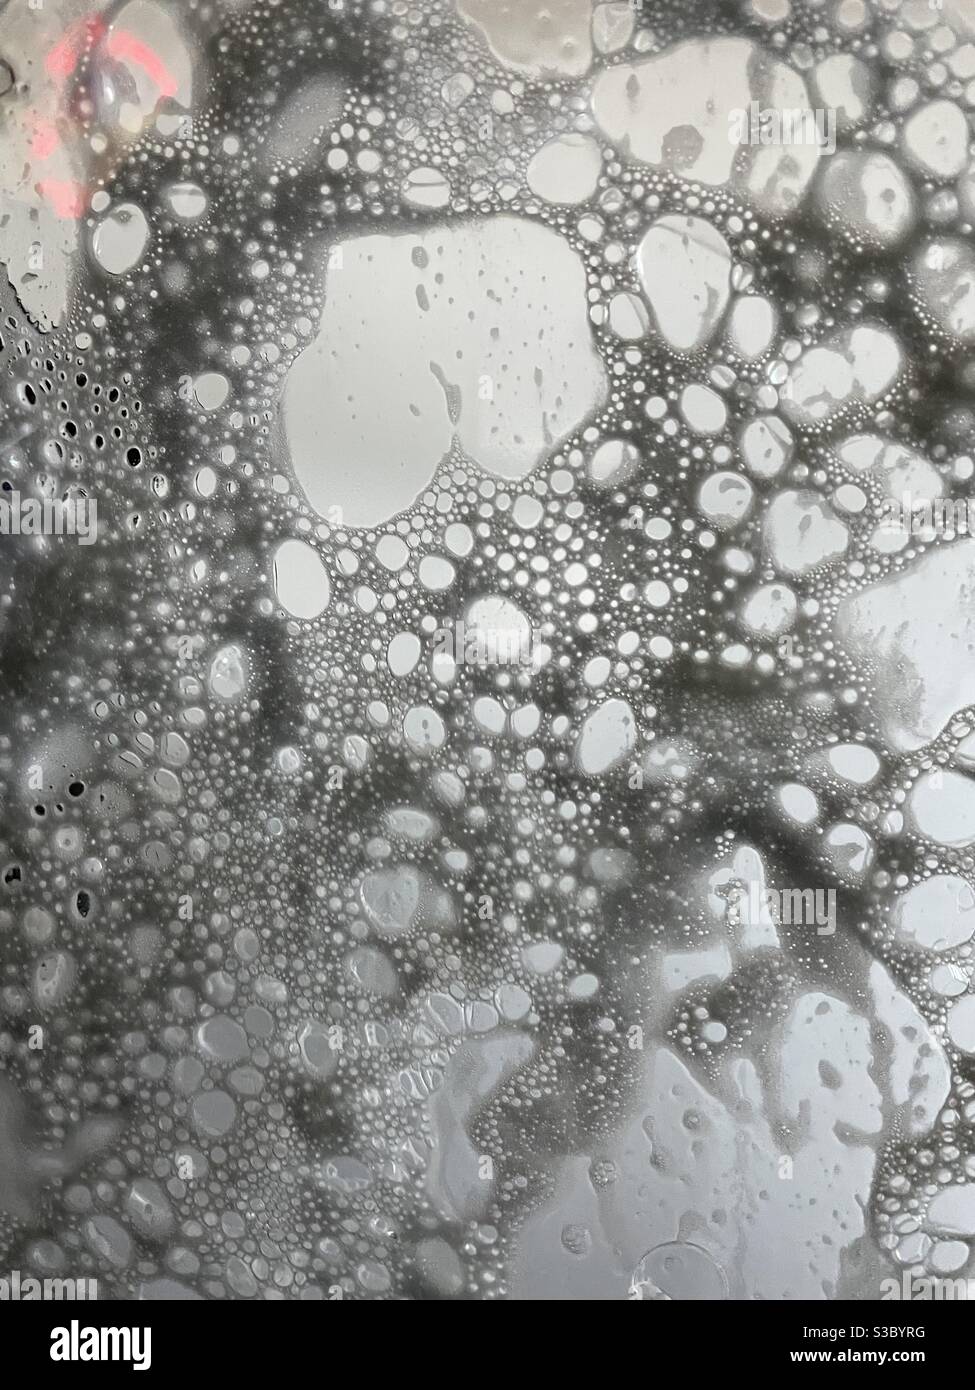 Abstract of soapy car wash suds on a windshield Stock Photo